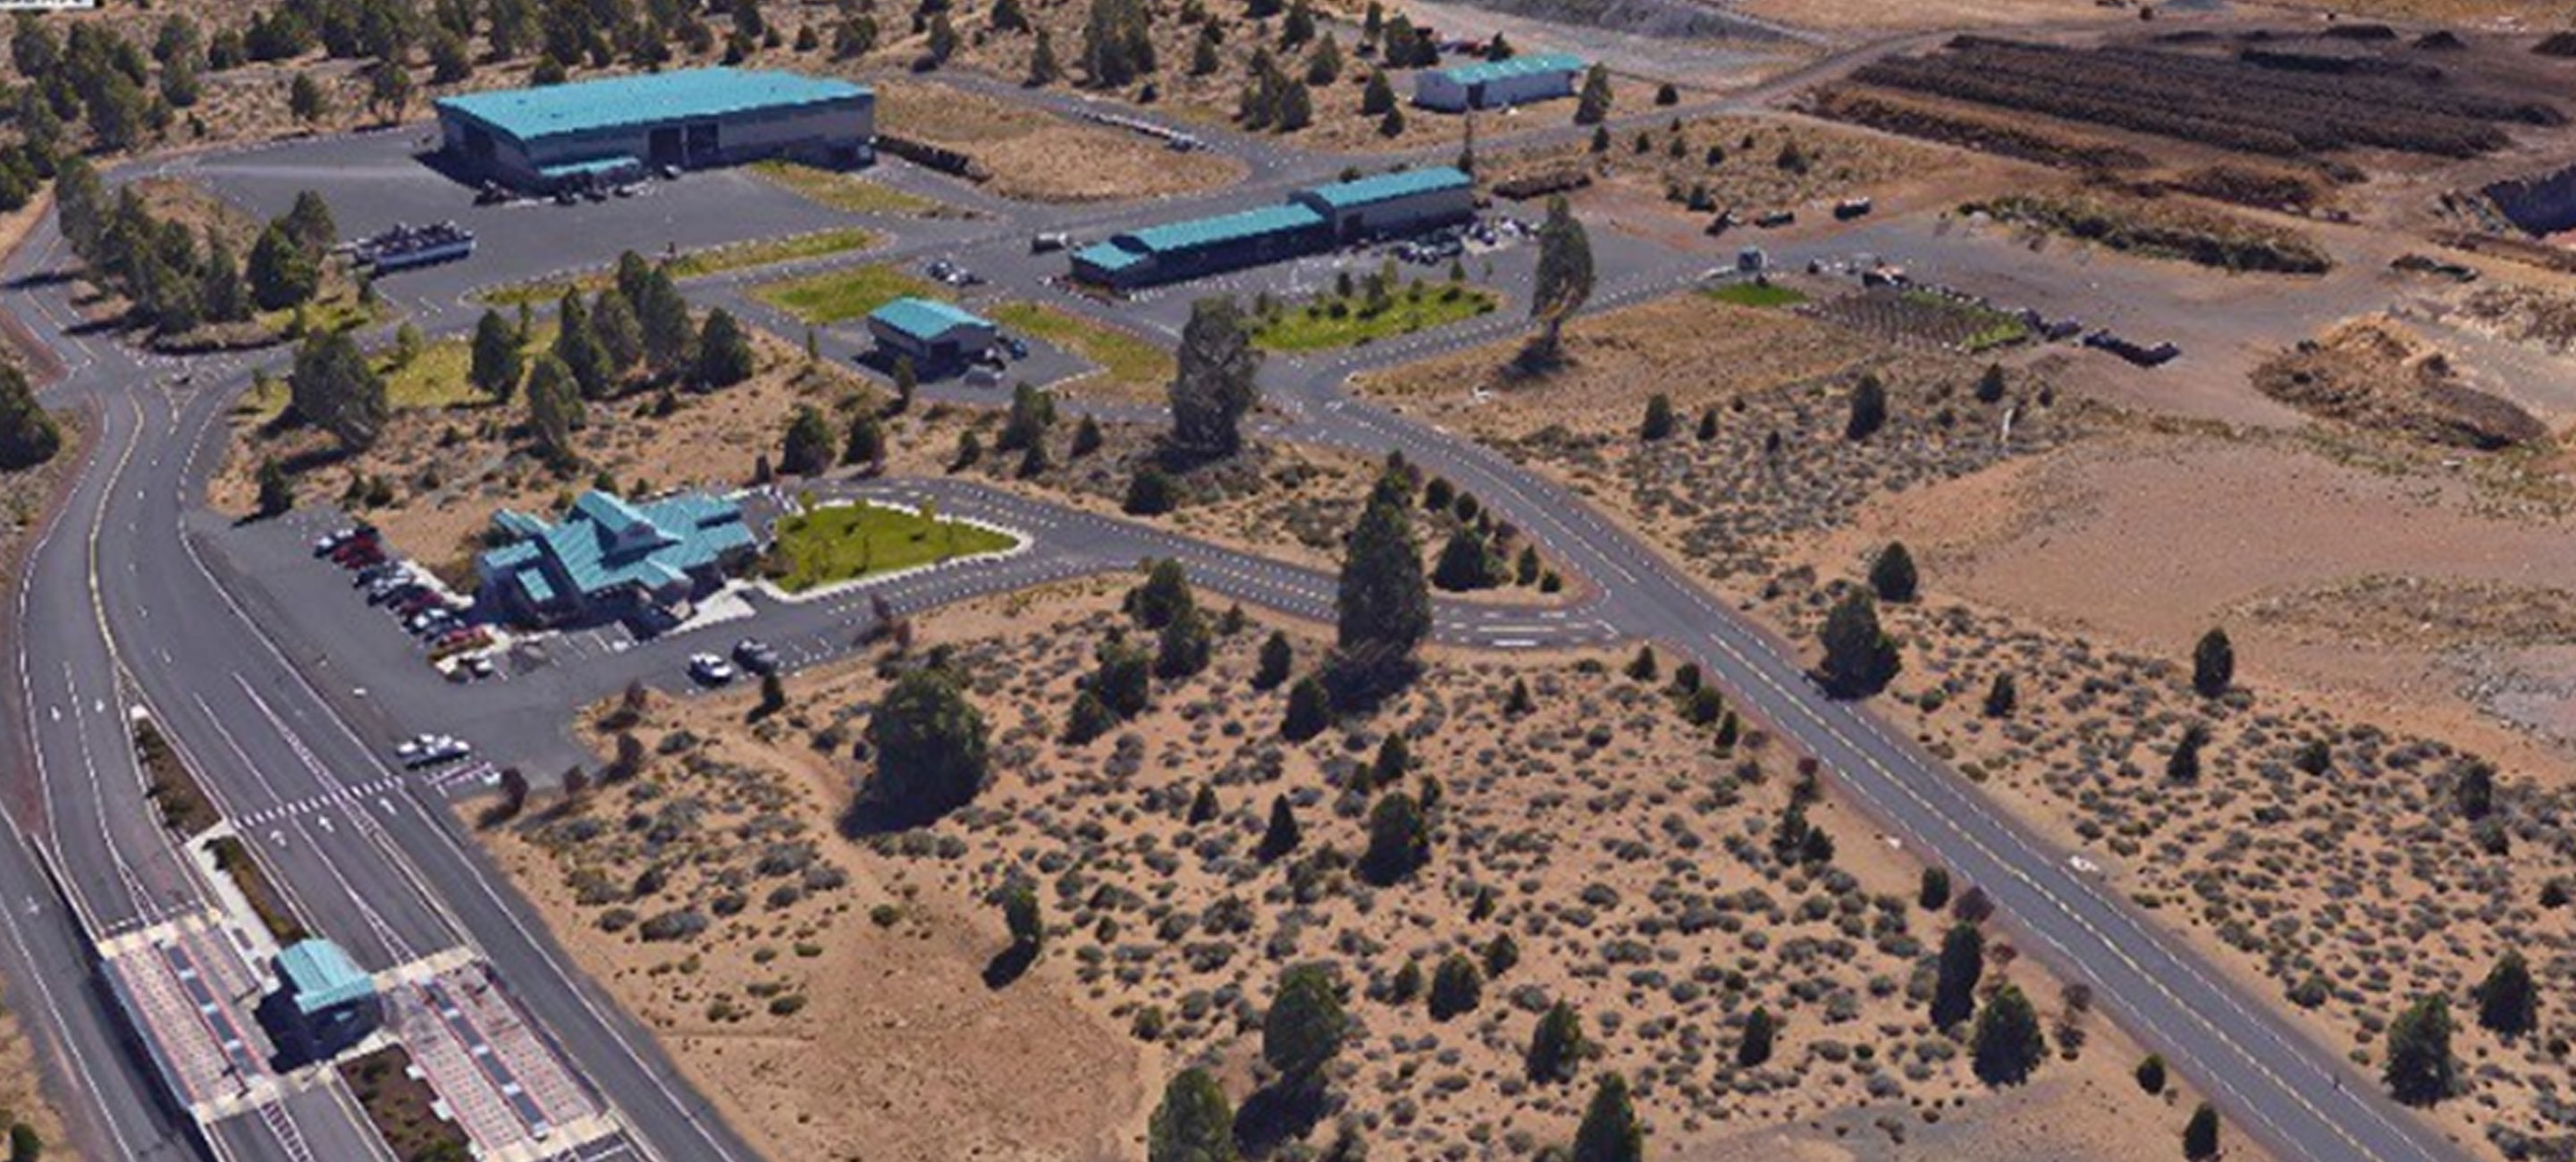 JRMA Awarded Contract to Complete Diversion Master Plan for Deschutes County, Oregon